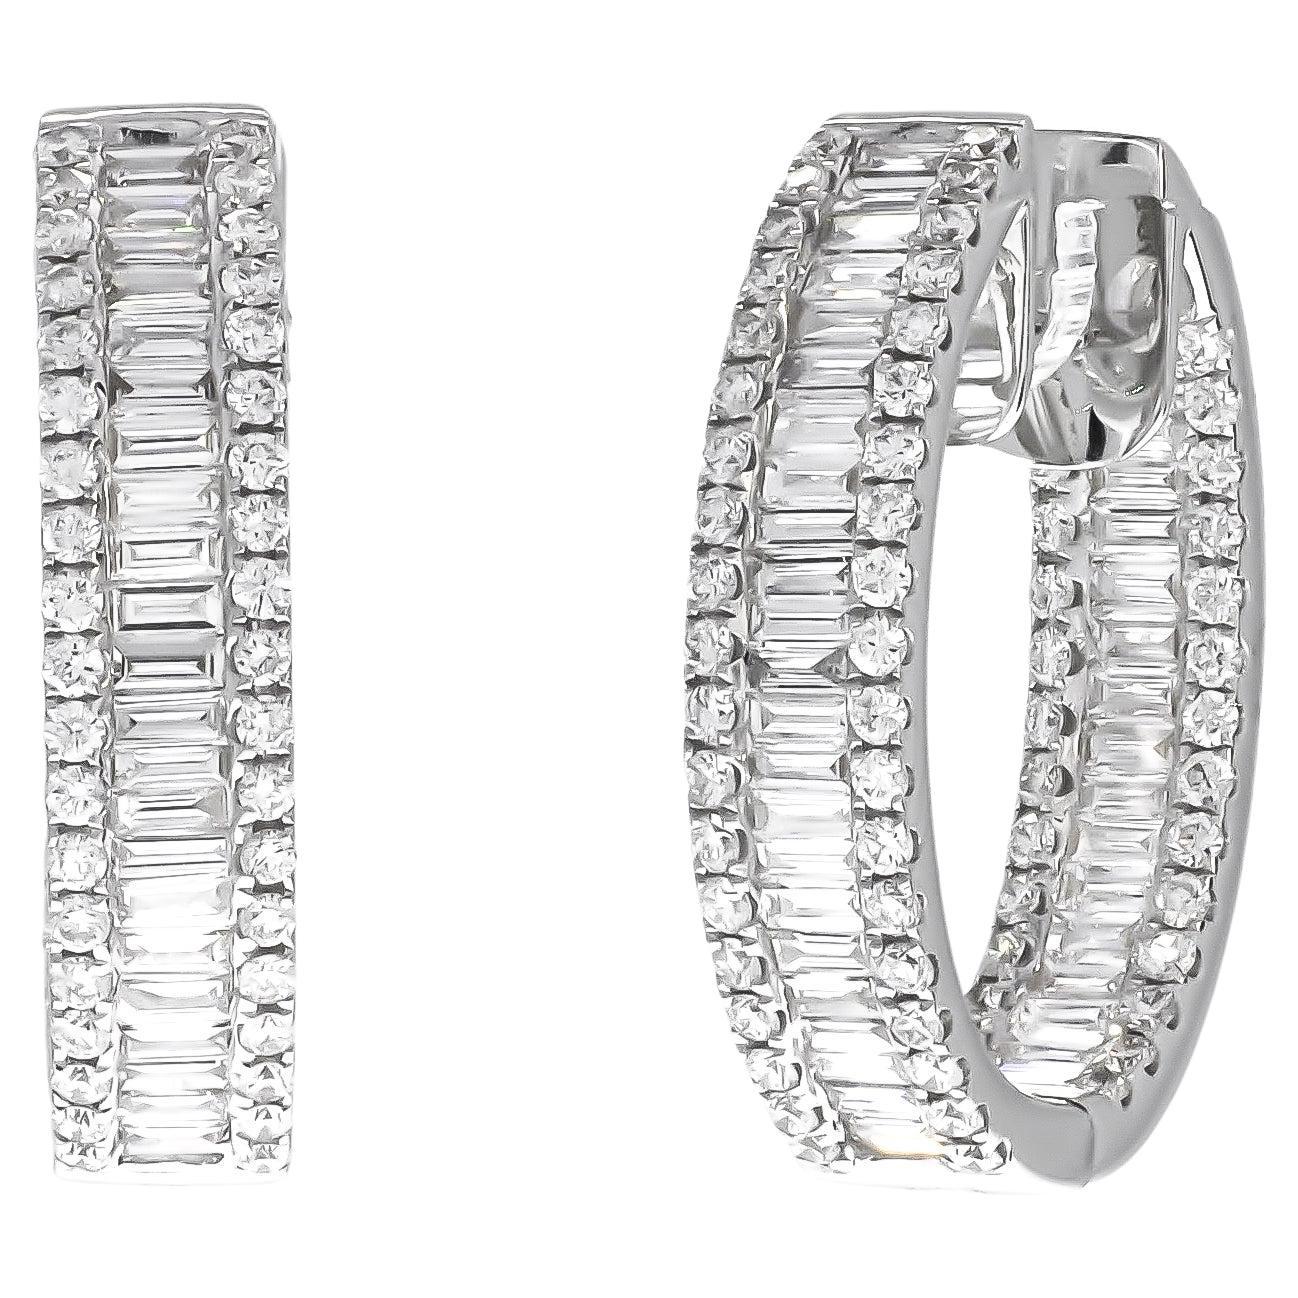 Natural Diamond 3.75 carats 18KT White Gold Baguette 'In and Out' Hoop Earrings 